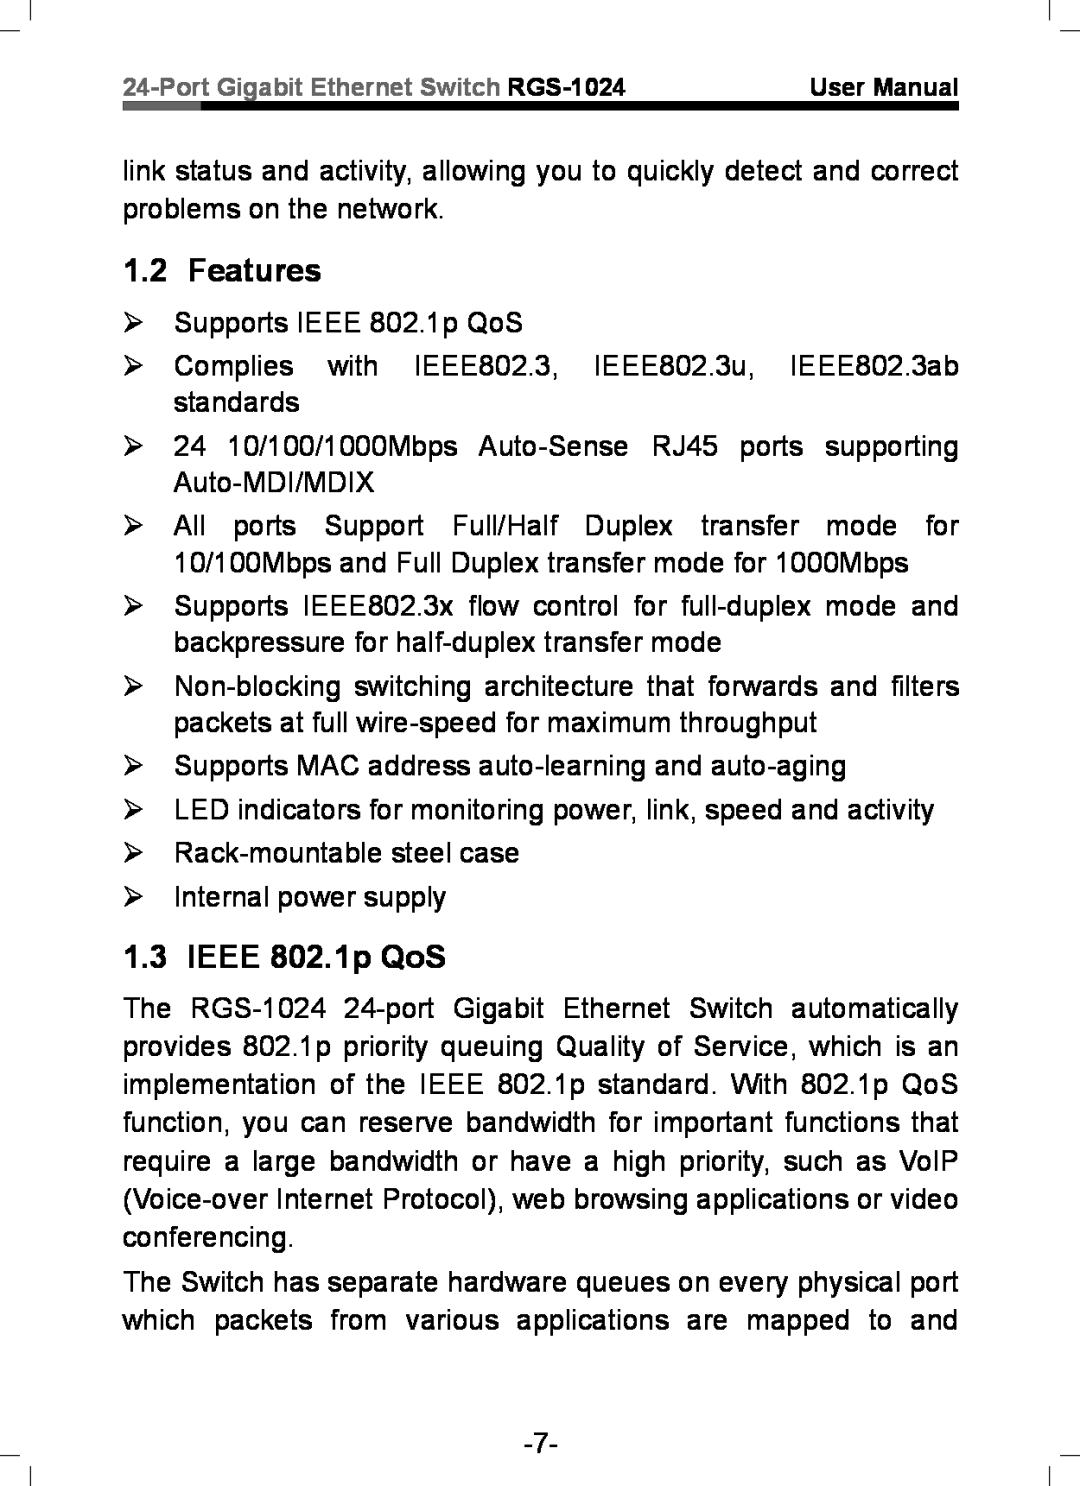 Rosewill RGS-1024 user manual Features, IEEE 802.1p QoS 